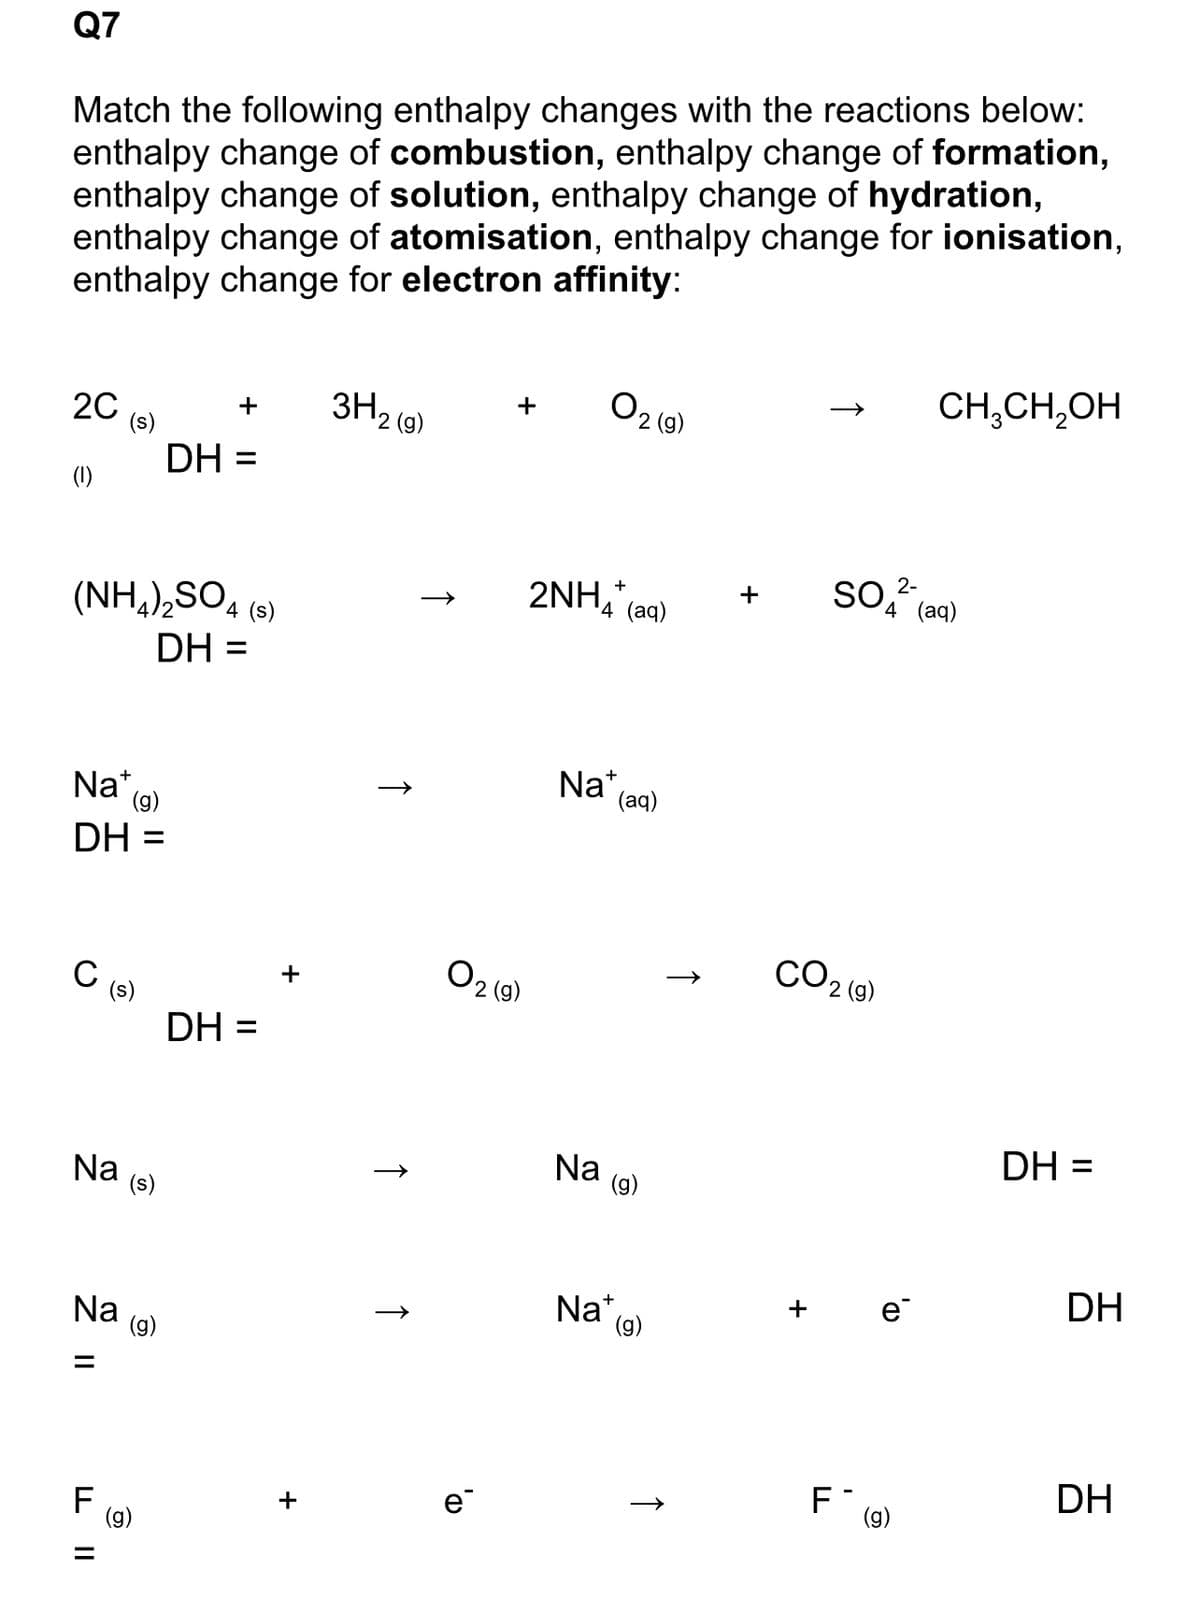 Q7
Match the following enthalpy changes with the reactions below:
enthalpy change of combustion, enthalpy change of formation,
enthalpy change of solution, enthalpy change of hydration,
enthalpy change of atomisation, enthalpy change for ionisation,
enthalpy change for electron affinity:
2C
(NH4)2SO4 (s)
DH =
Nat
(g)
DH =
C
Na
Na
||
=
(s)
L ||
S
=
(s)
(g)
+
DH =
(g)
DH =
+
+
3H₂ (9)
↑
↑
个
+
02 (9)
e
02 (9)
2NH4+ (aq)
Na (aq)
Na
(g)
Na+,
(g)
CO 2 (g)
+
2-
SO (aq)
CD₁
e
CH₂CH₂OH
F
(g)
DH =
DH
DH